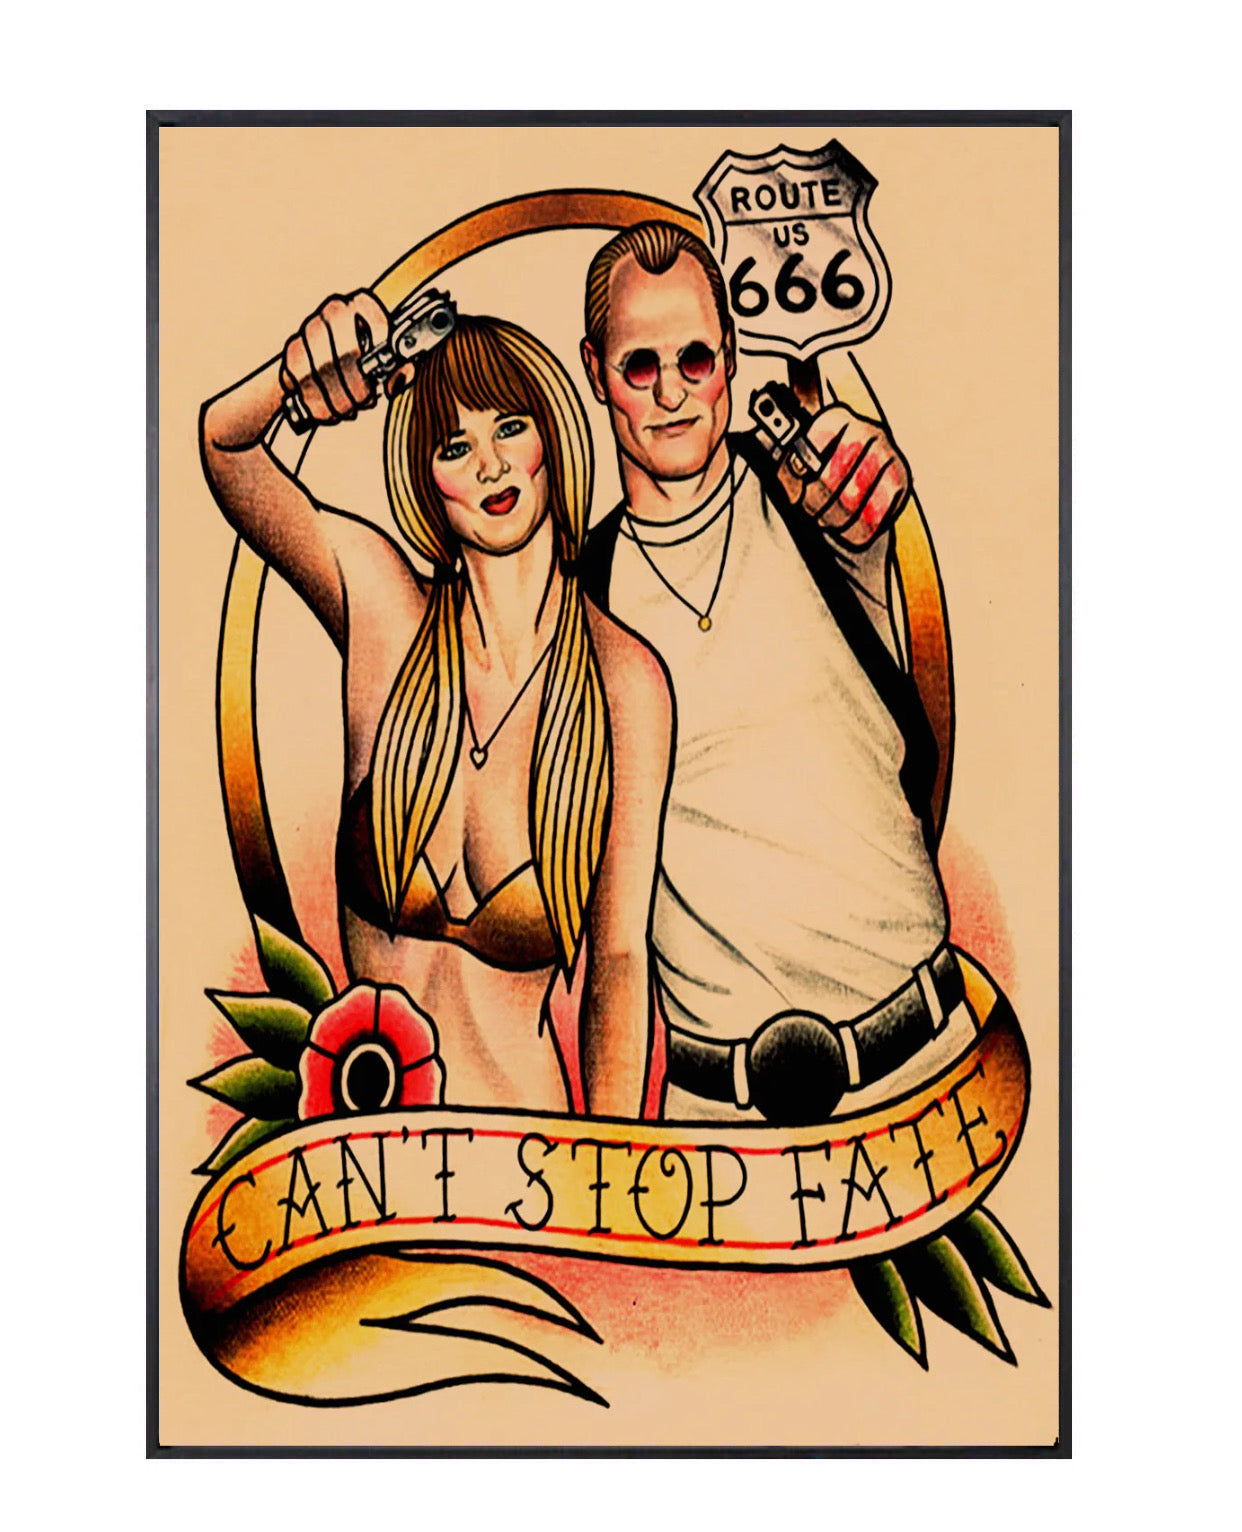 "can't stop fate" tattoo poster